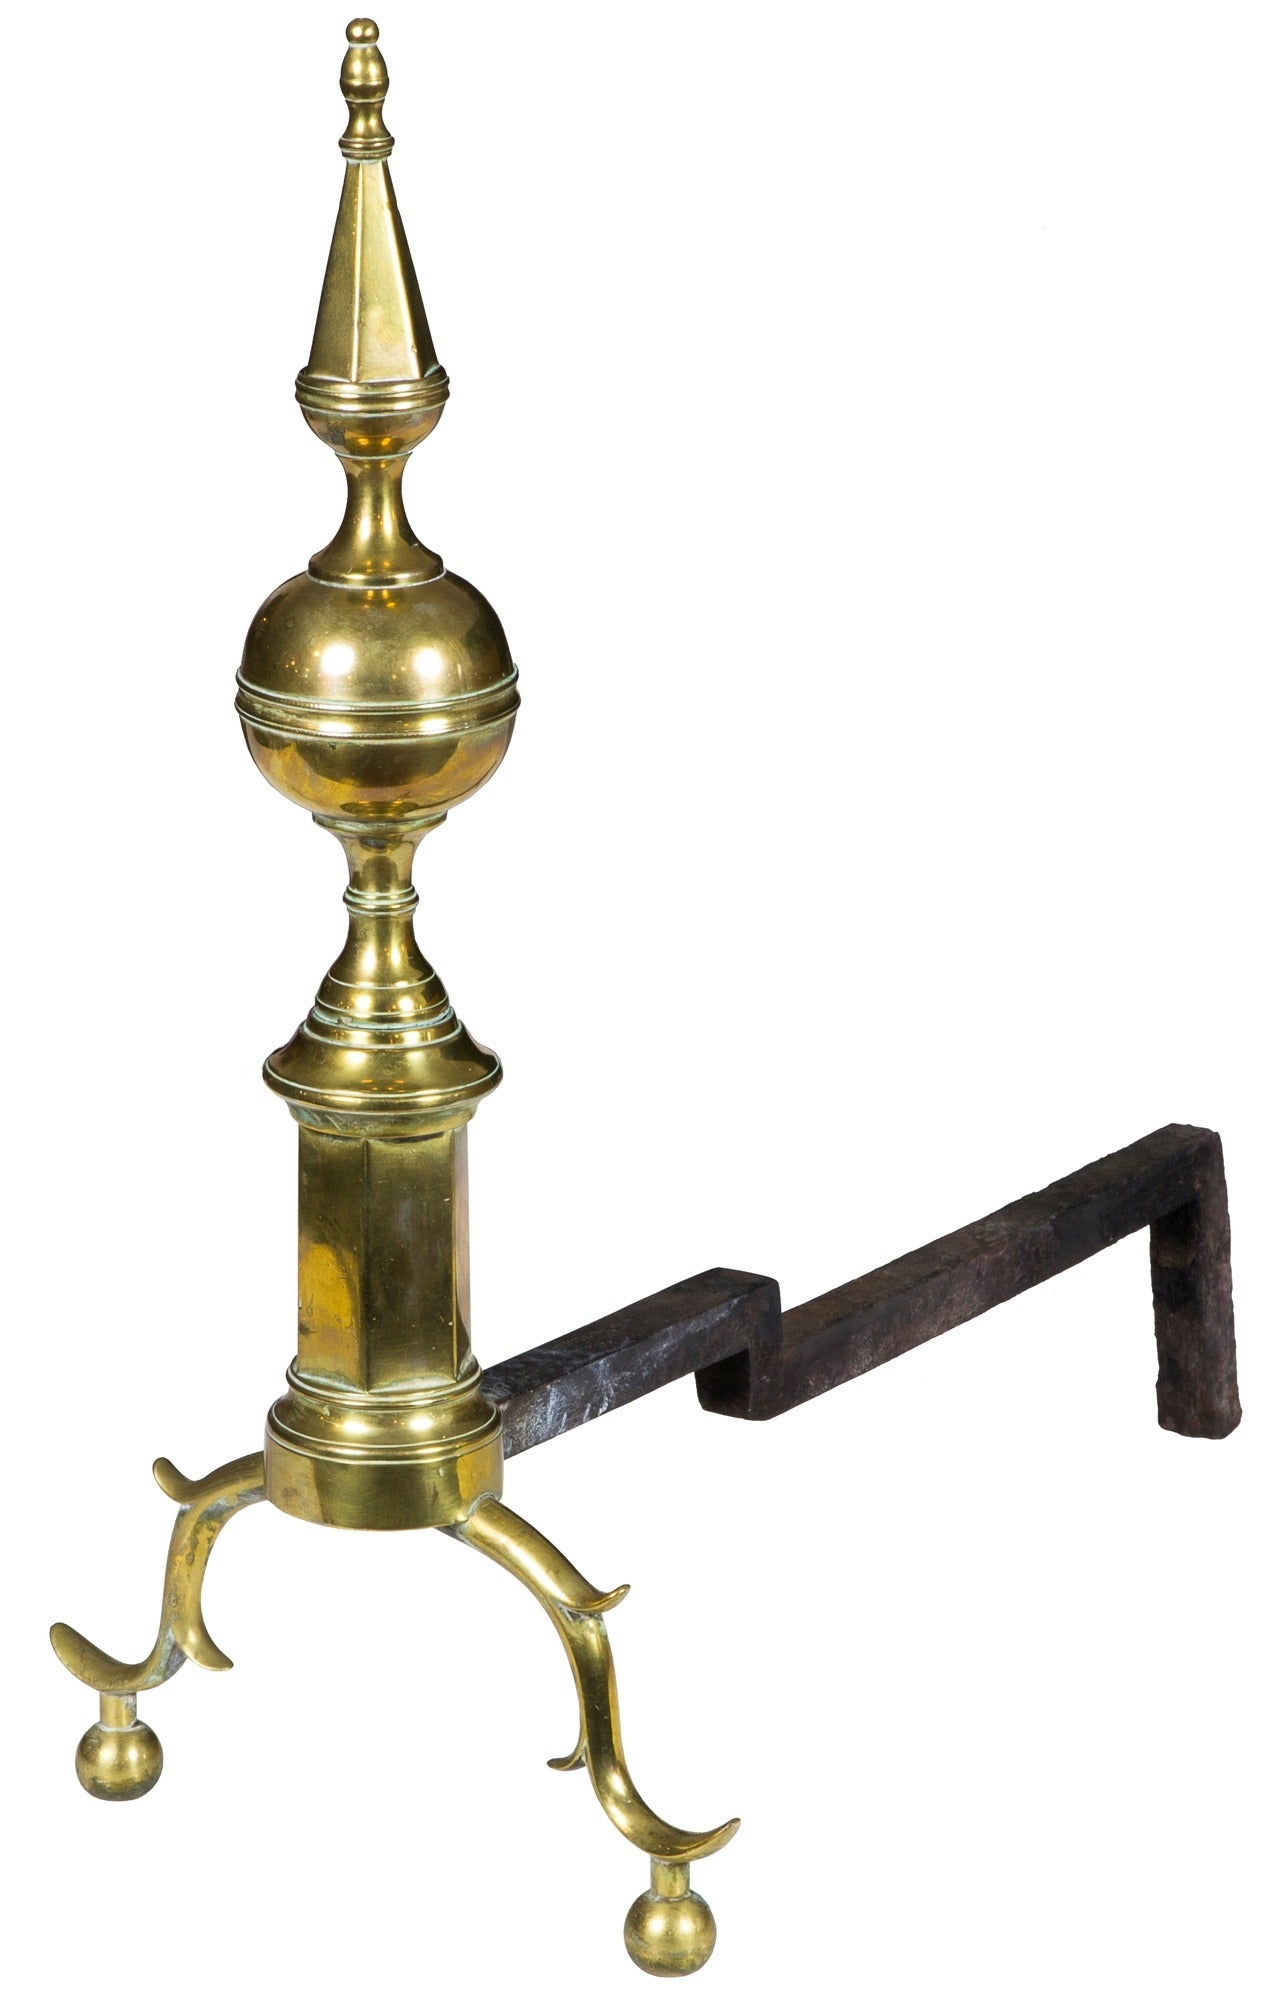 These irons are 24 1/4” inches tall and make a great statement with the elaborate steeple finials above the ribbed central ball. The included fire tools are original and complete a matching set with a co-ordinating steeple and ball design handles.